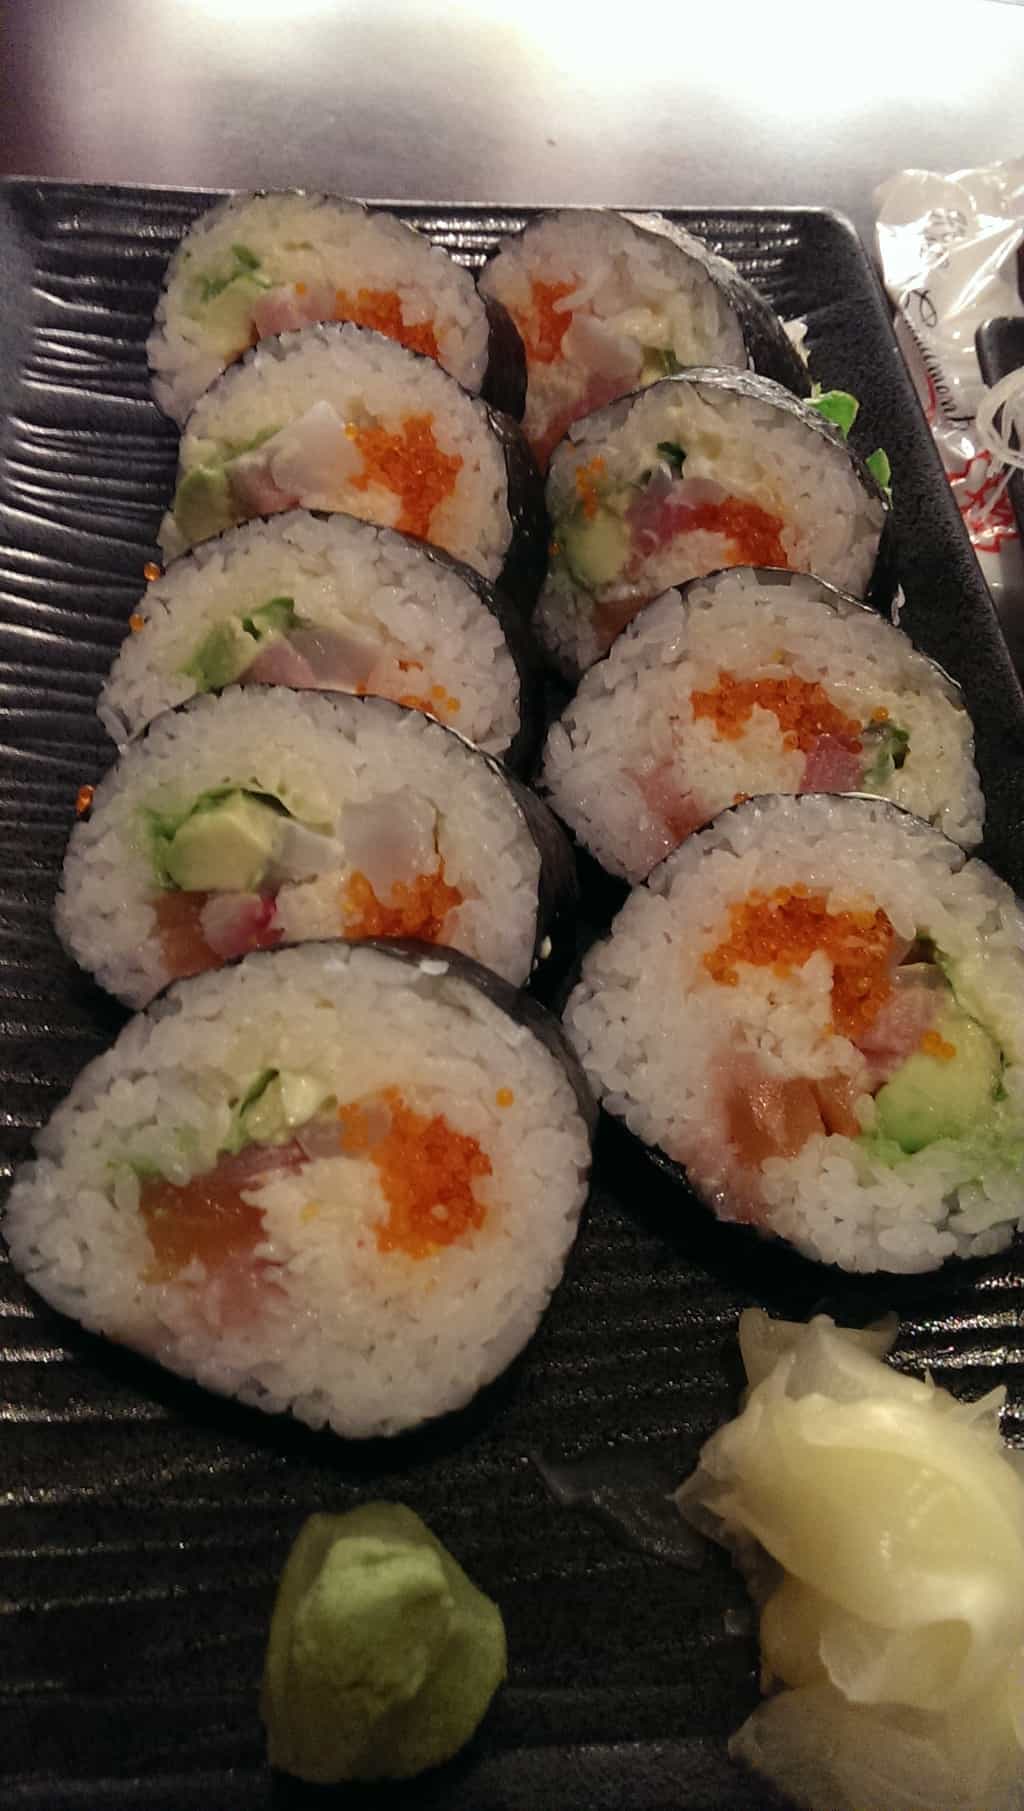 House special roll